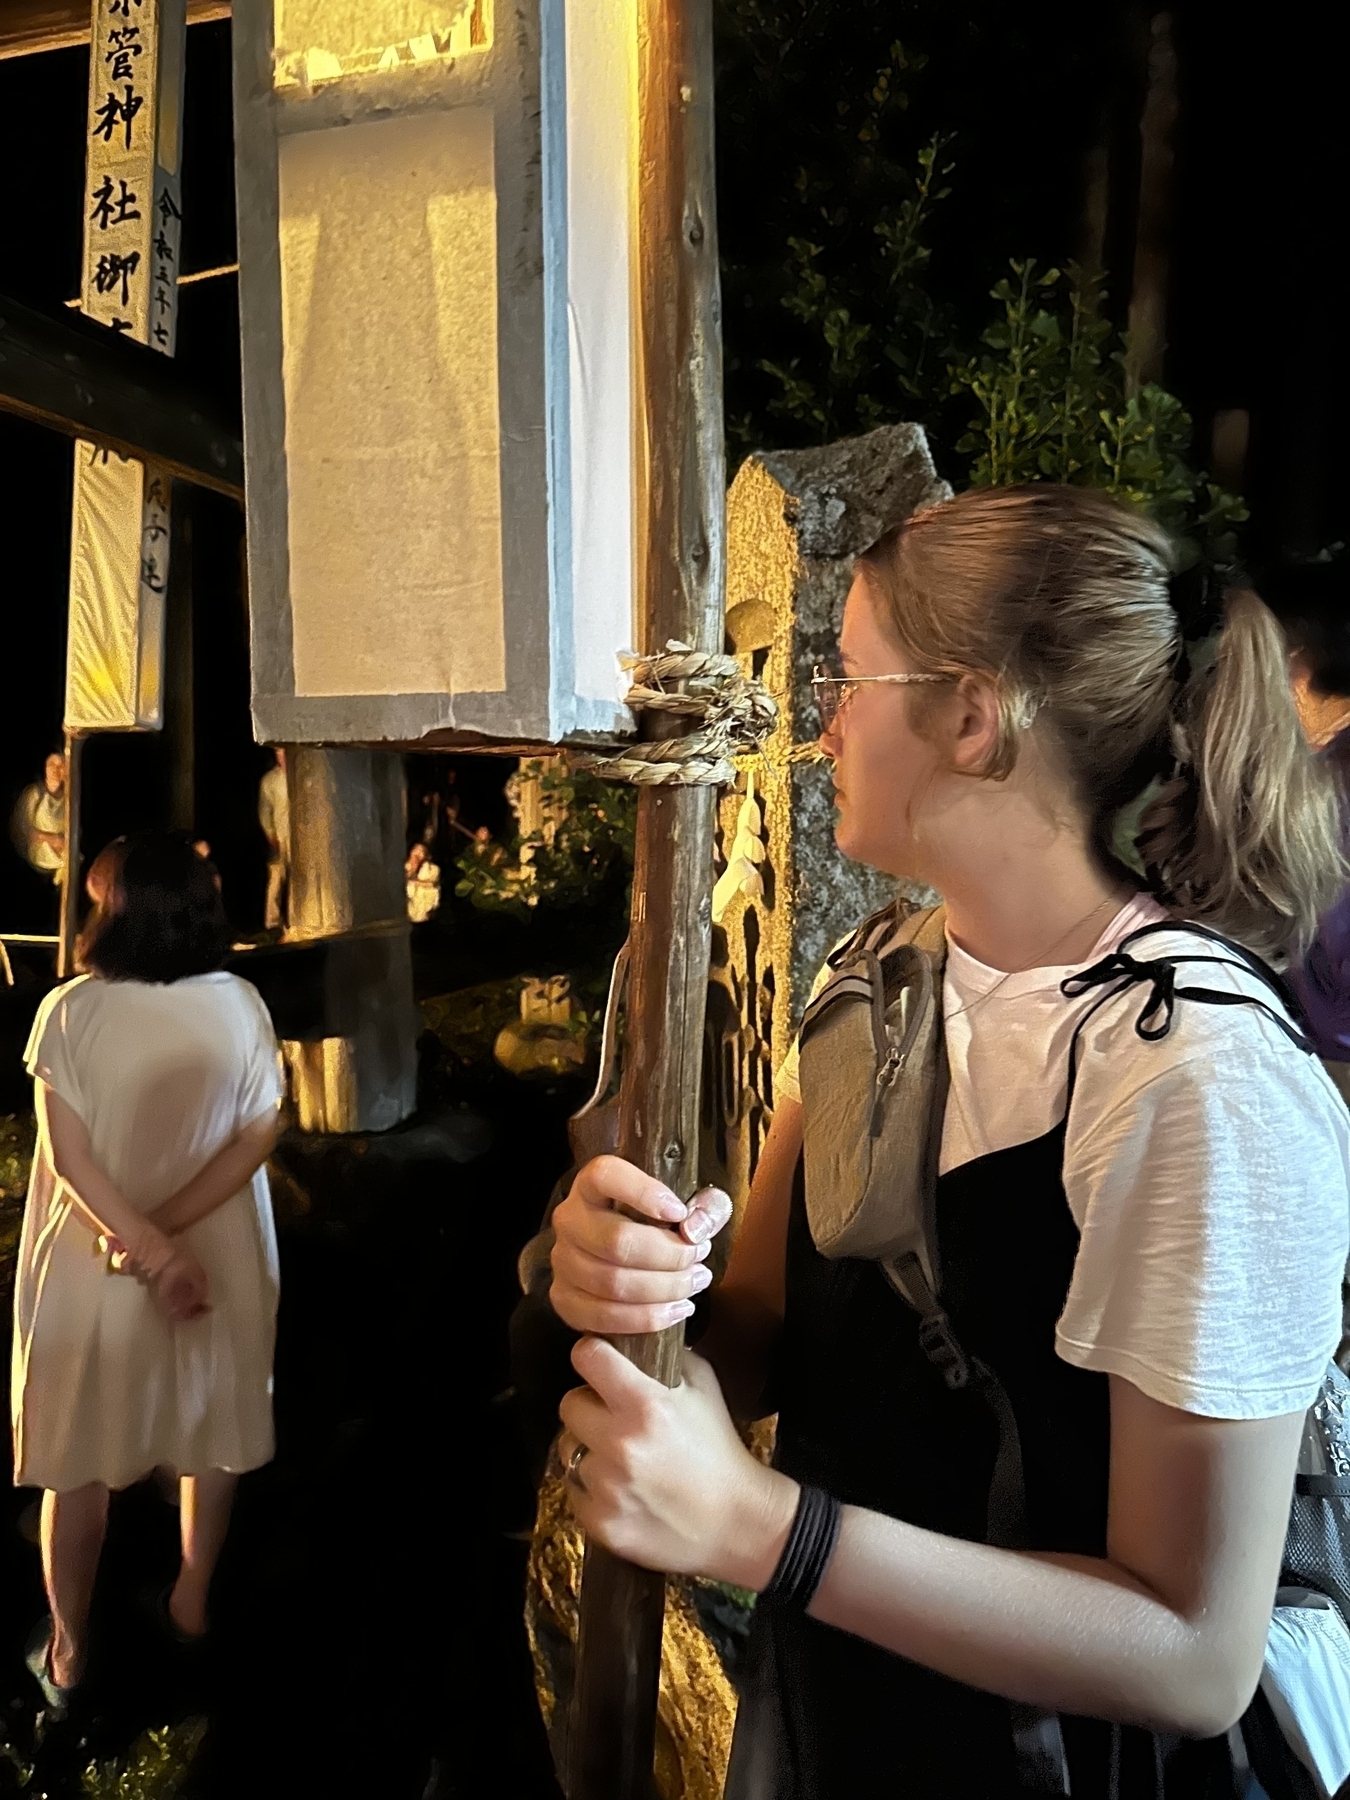 Carrying a lantern in the parade